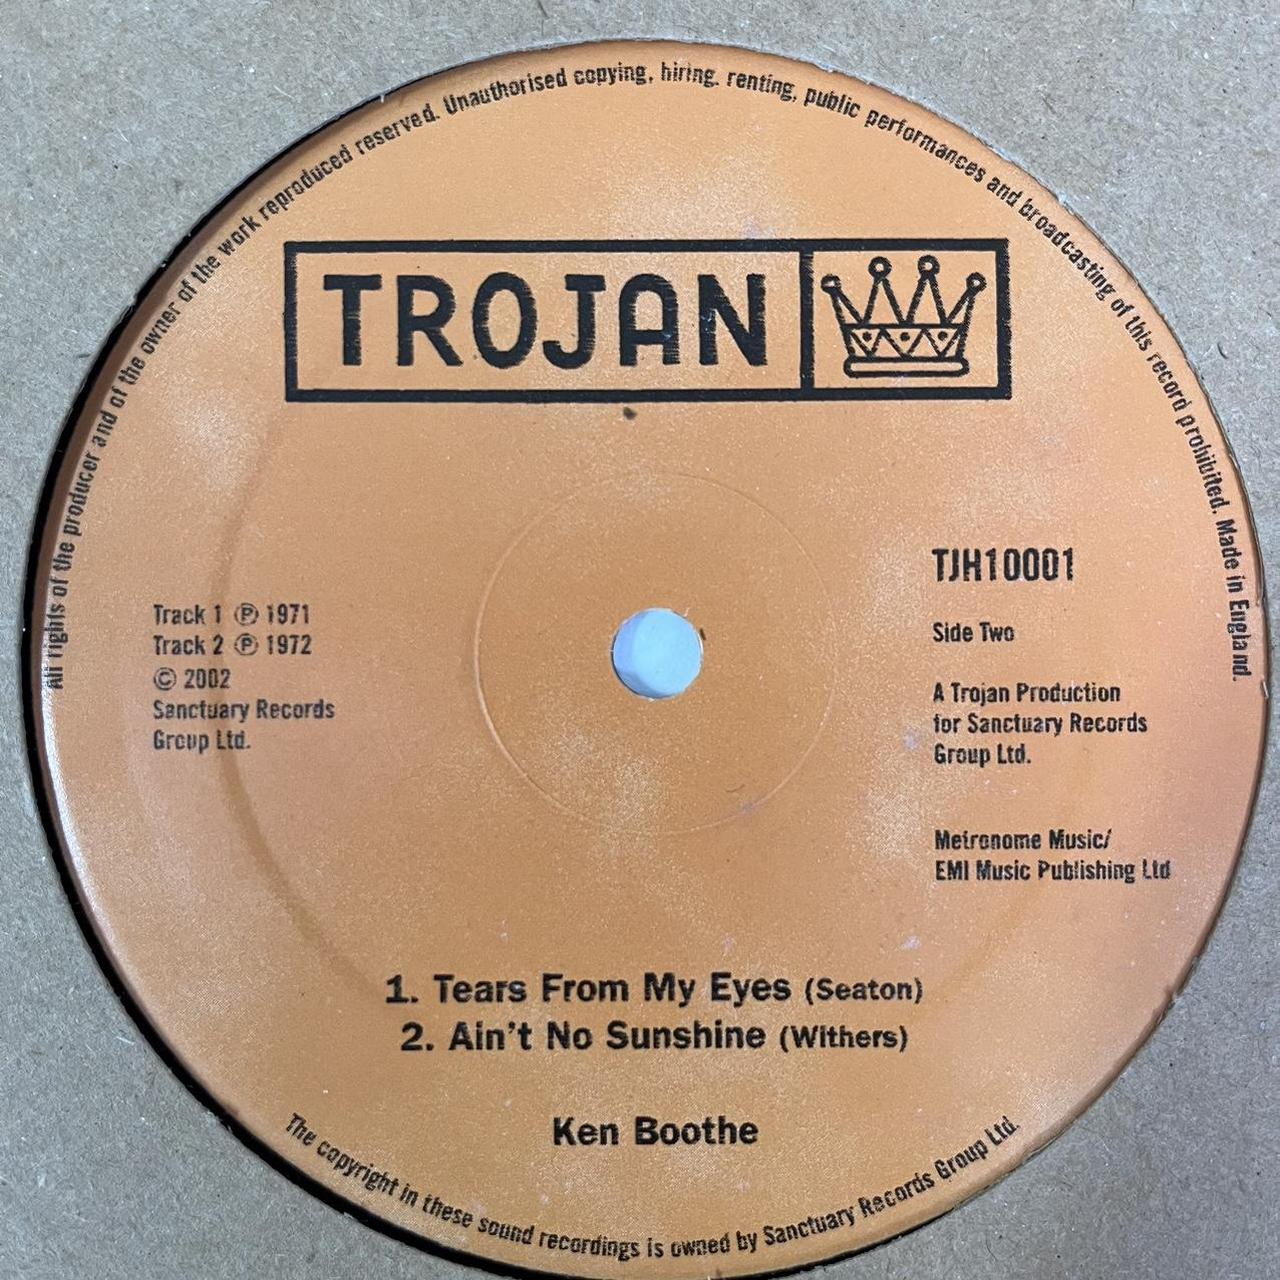 Ken Boothe “Can’t You See” / “Ain’t No Sunshine” 4 Track 10inch Dub Plate on Trojan Records